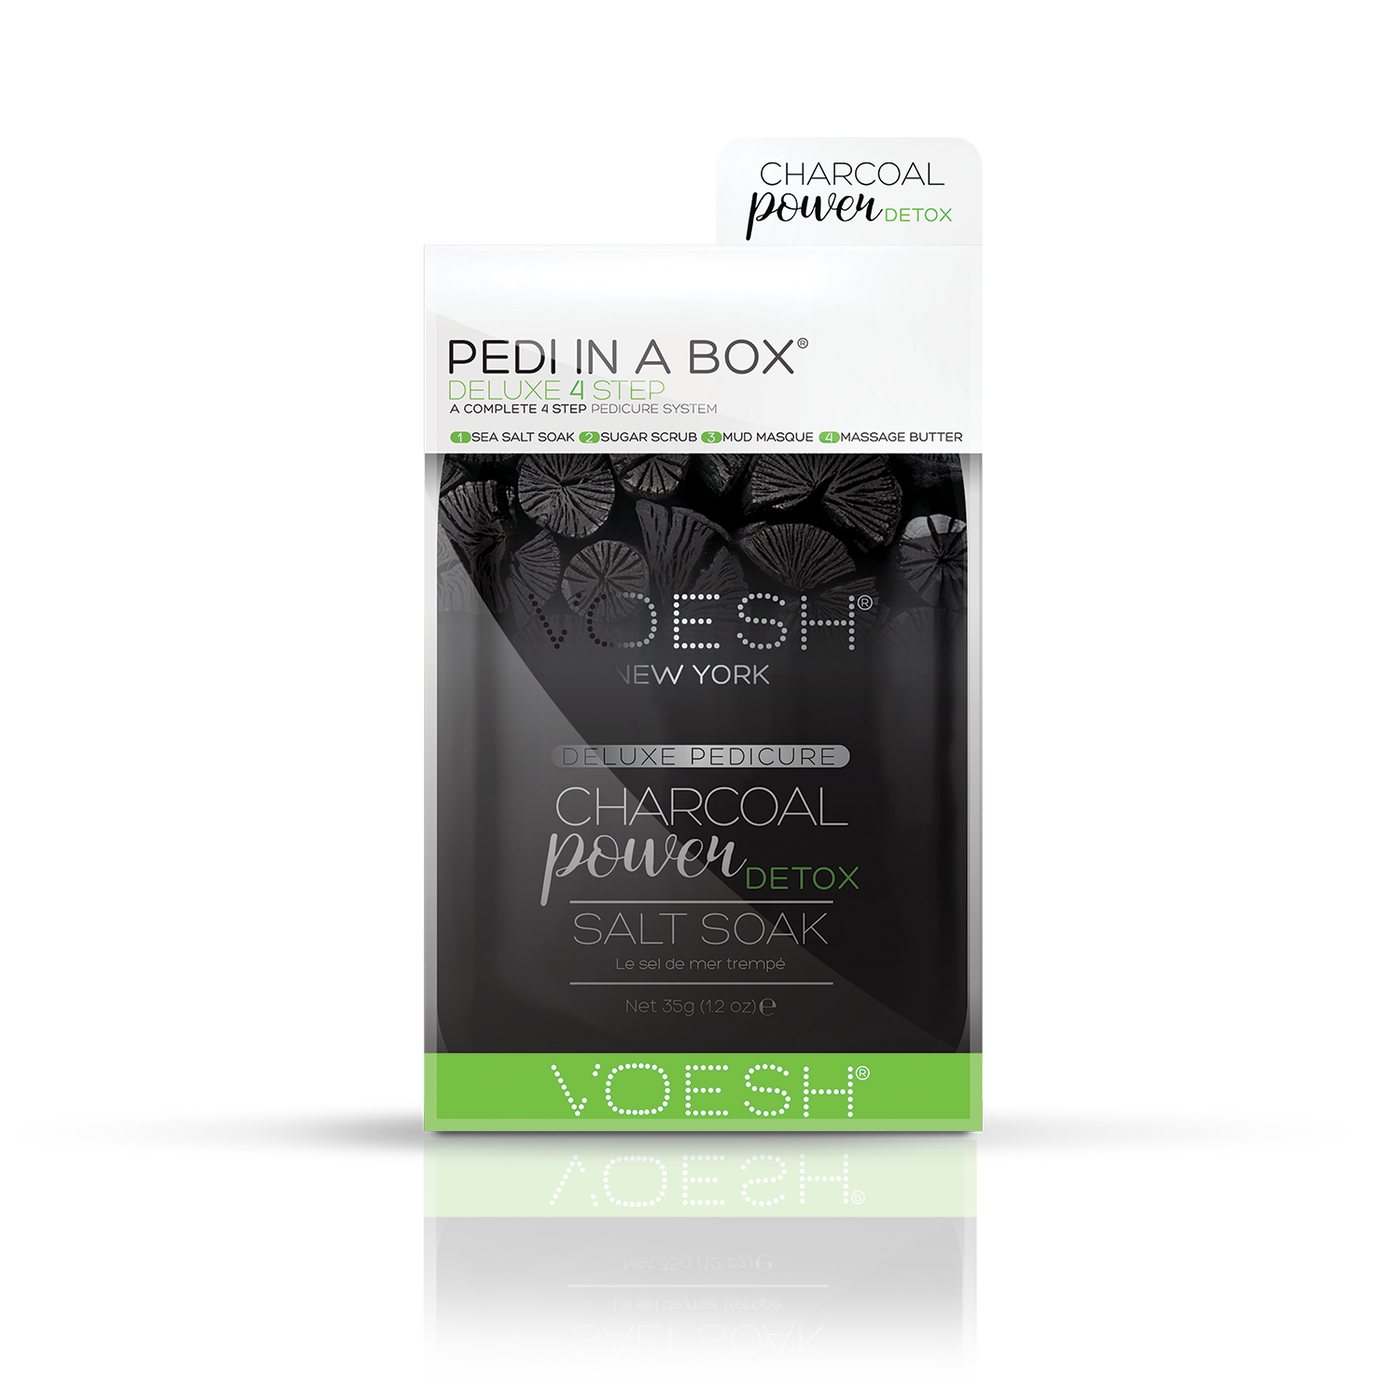 VOESH Deluxe 4-Step - Charcoal Power Detox